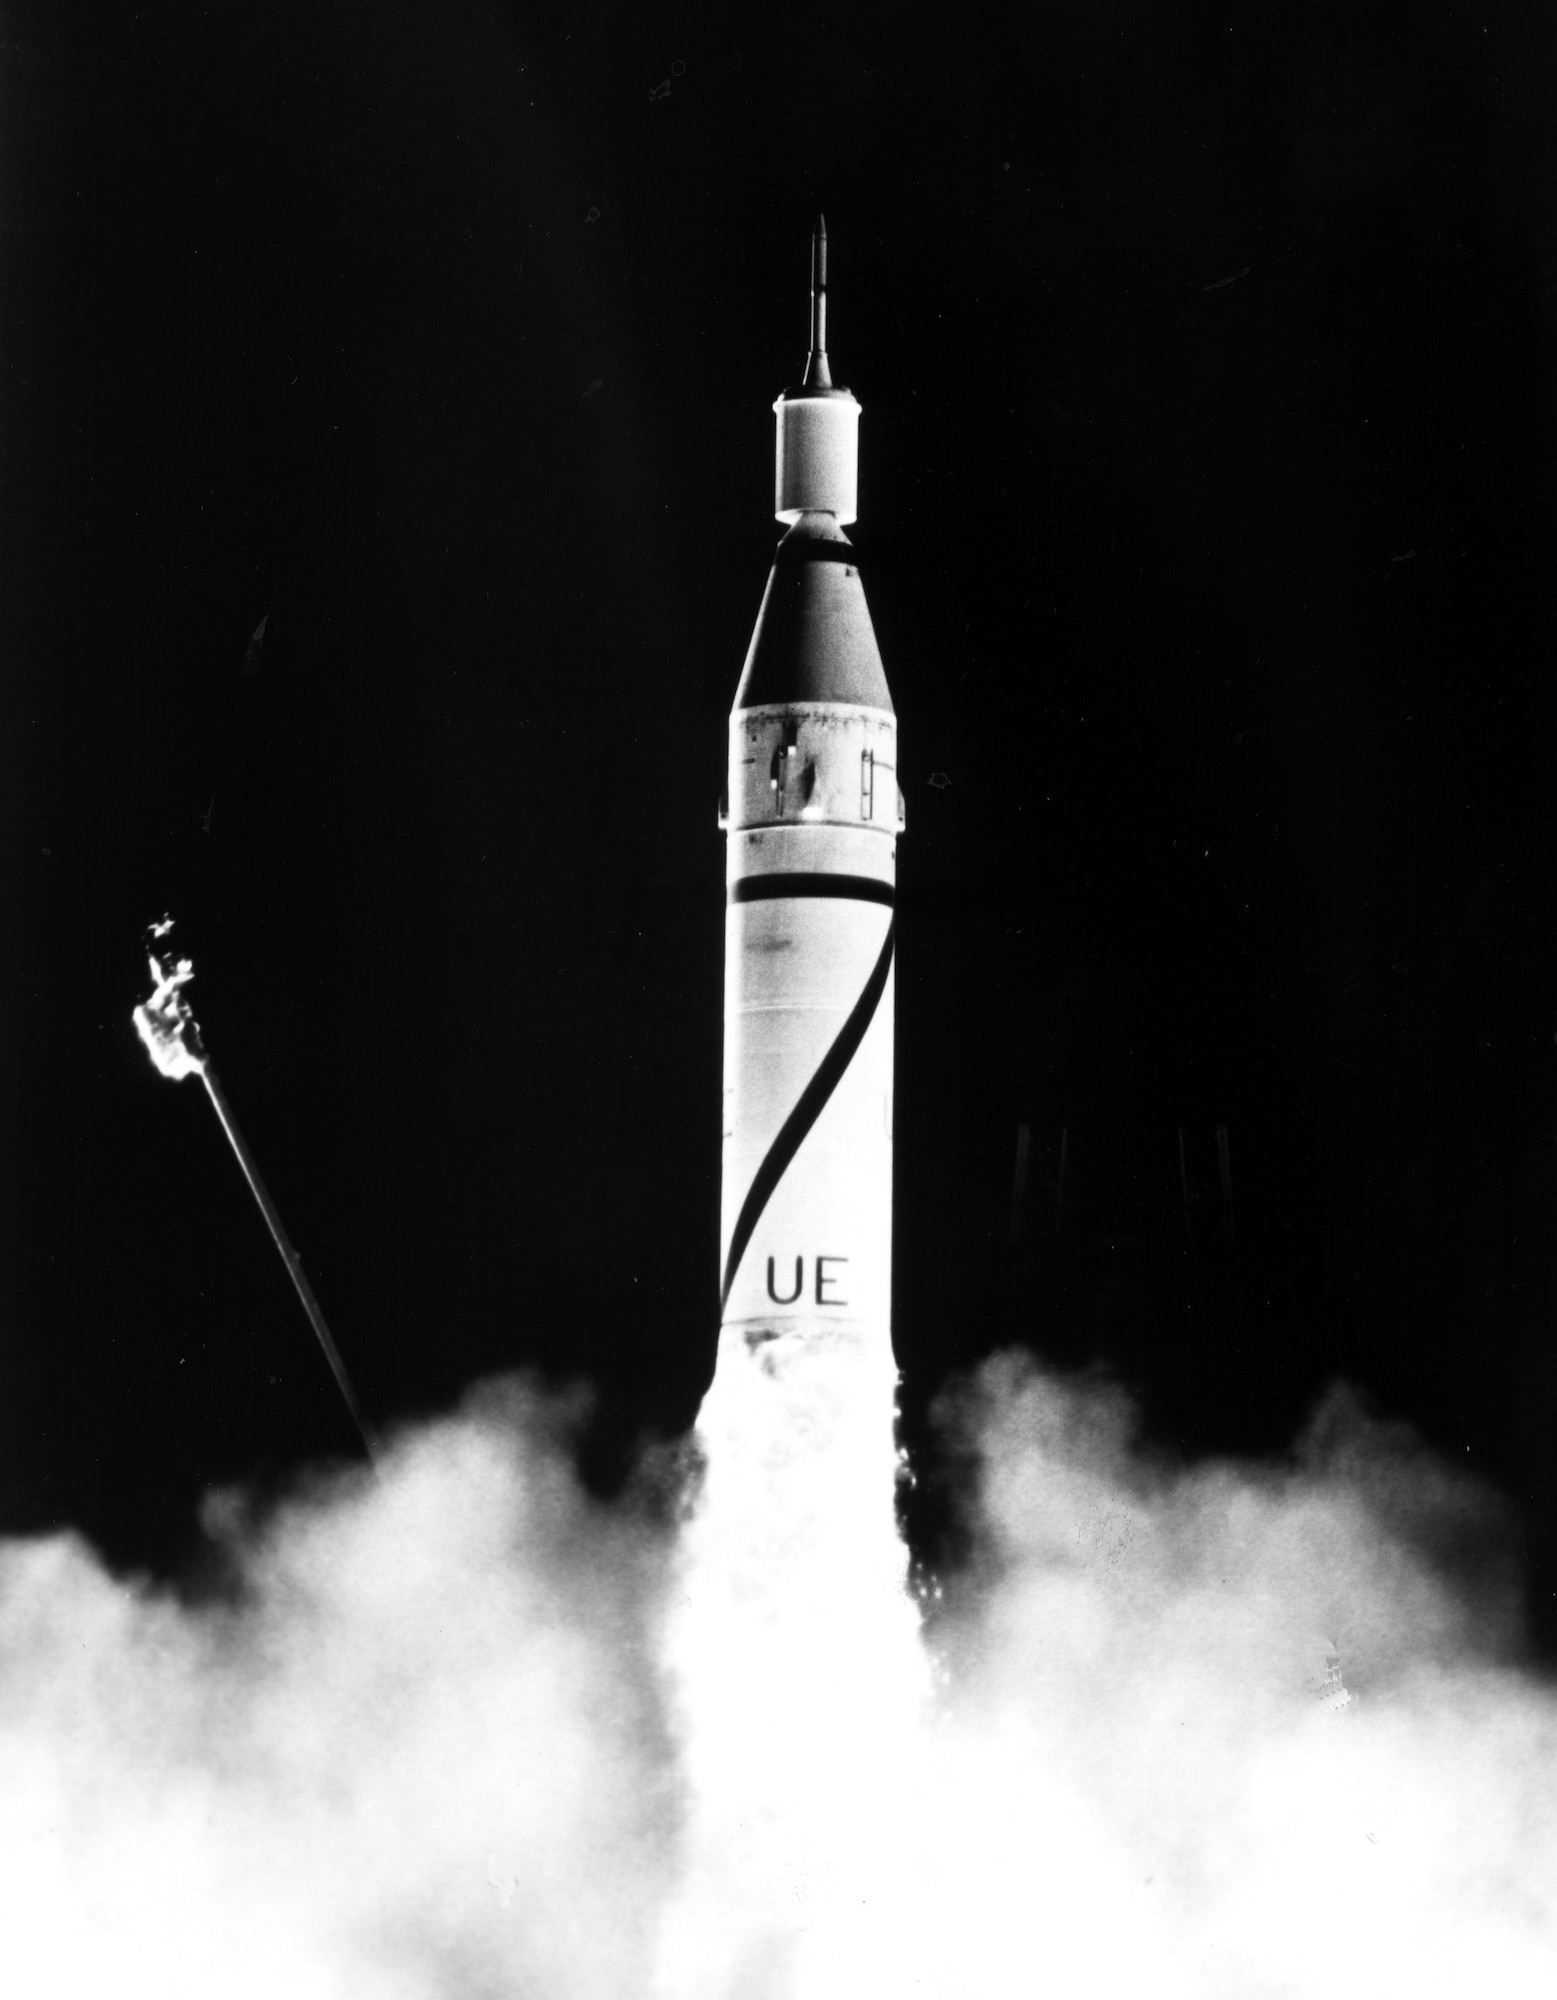 The United States' first satellite, Explorer 1, is launched into orbit by a Jupiter C rocket at 10:48 p.m. EST, on Jan. 31, 1958. Explorer 1 confirmed existence of high-radiation bands above the Earth's atmosphere. (Courtesy photo by NASA)